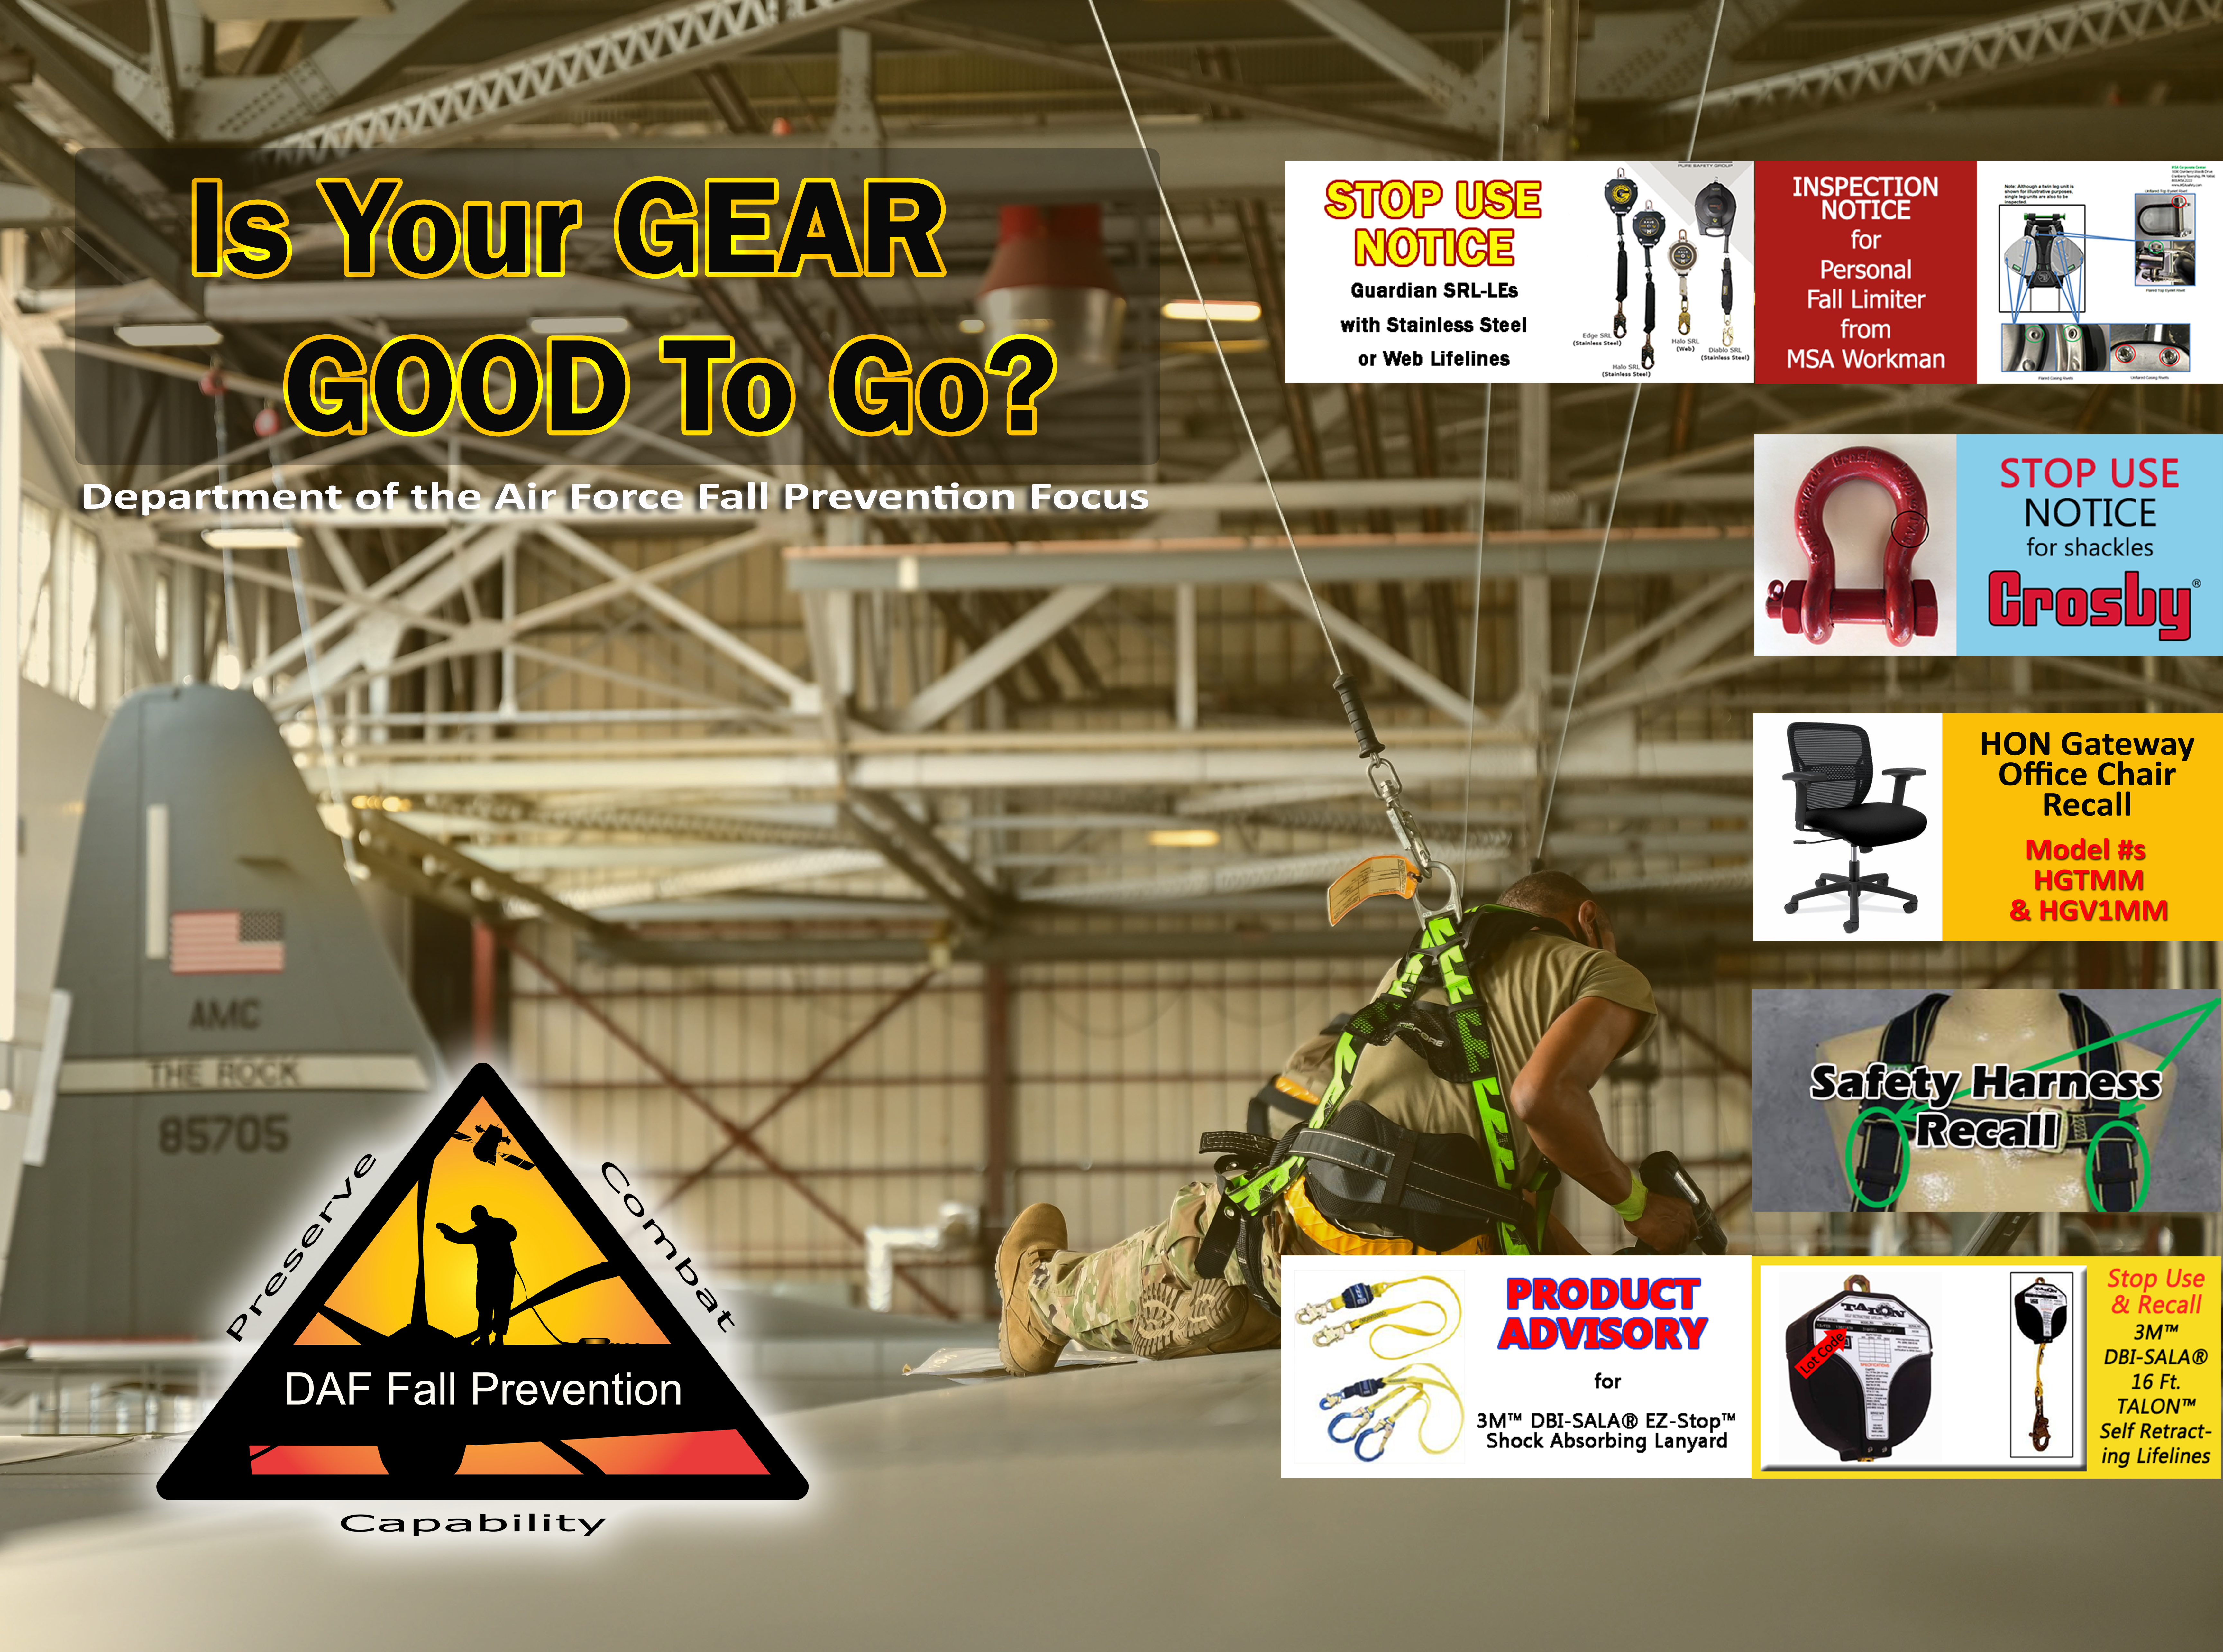 Is Your Gear Good To Go poster - Airman in harness sitting on top of plane